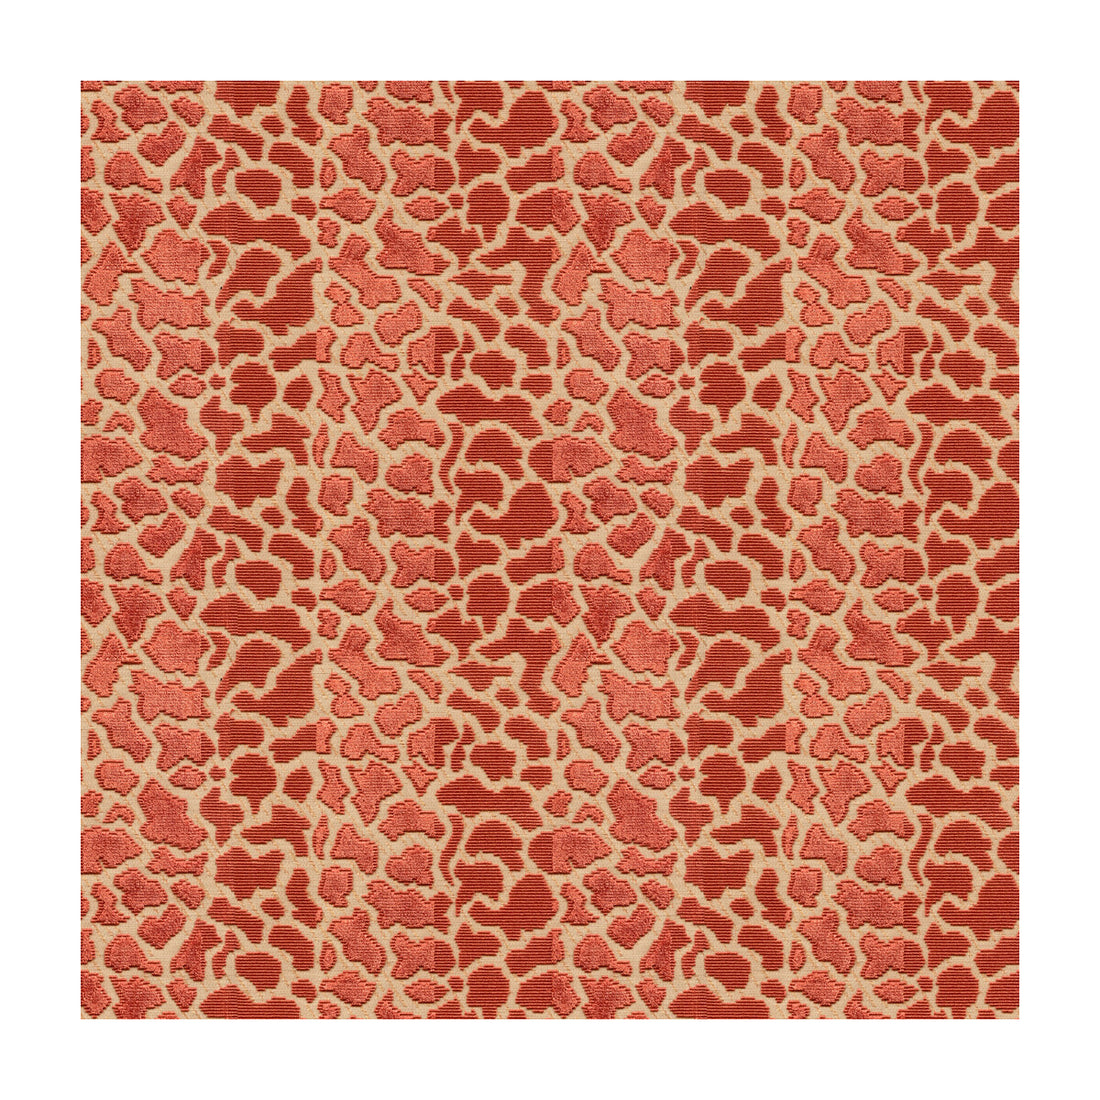 Timbuktu Velvet fabric in red color - pattern 2015120.19.0 - by Lee Jofa in the Parish-Hadley collection